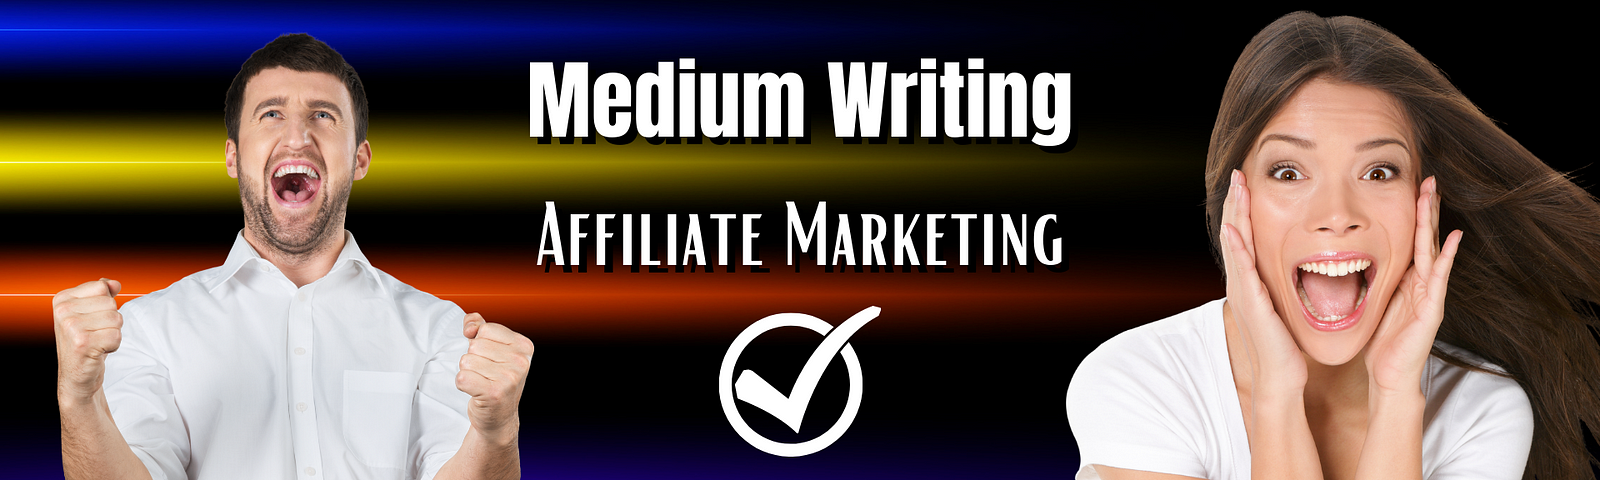 affiliate marketing and generating online sales with medium stories